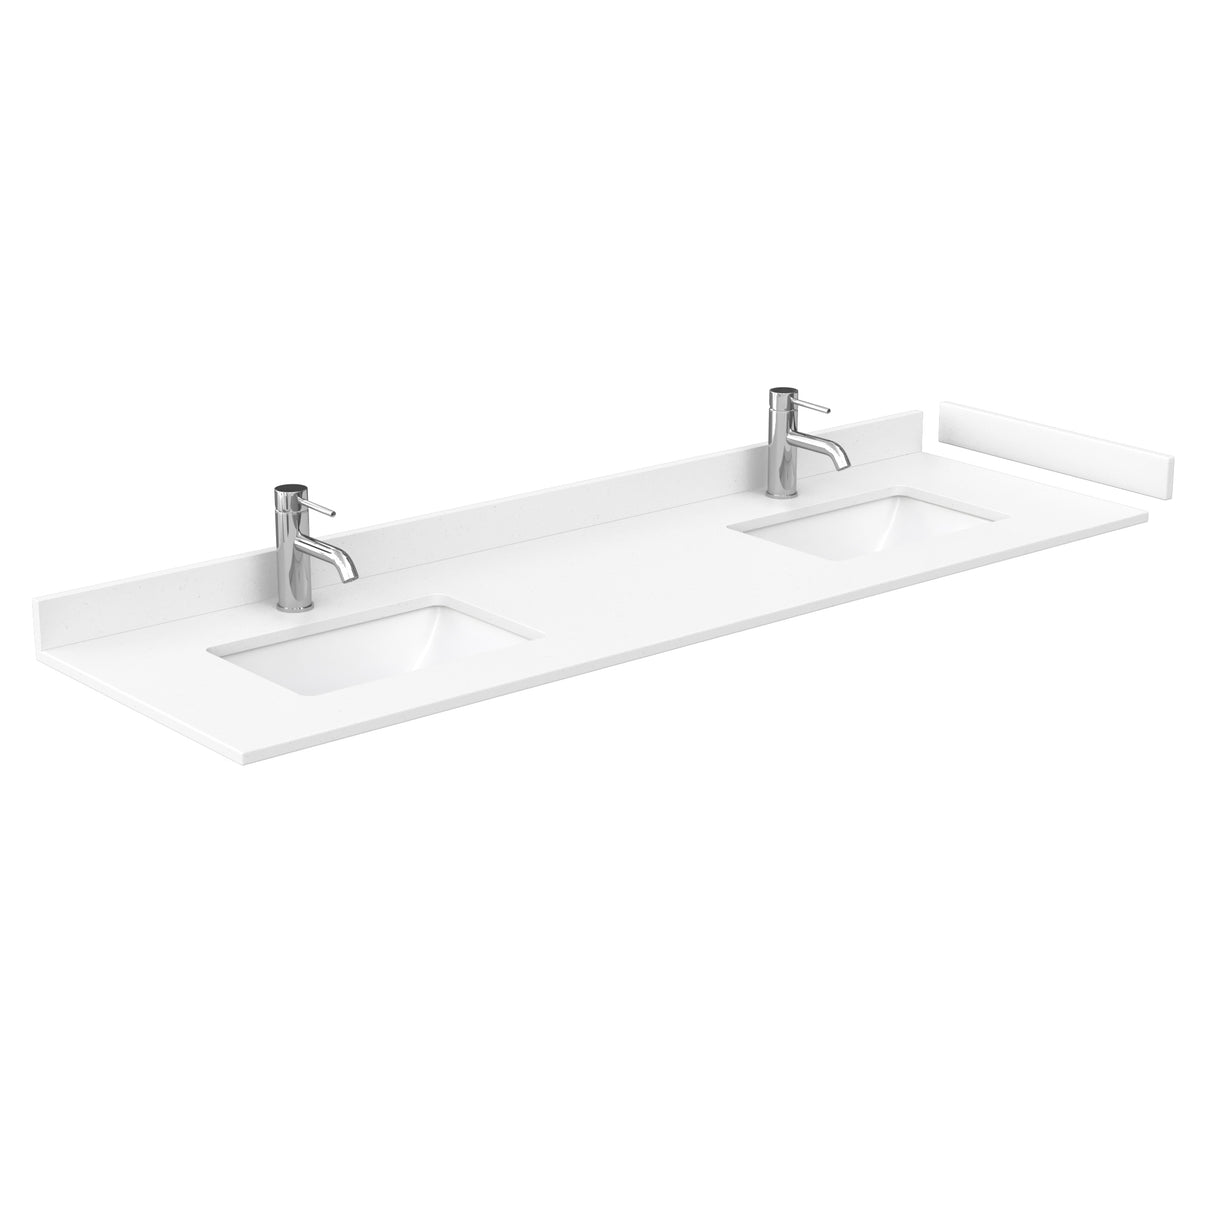 Sheffield 72 Inch Double Bathroom Vanity in White White Cultured Marble Countertop Undermount Square Sinks 70 Inch Mirror